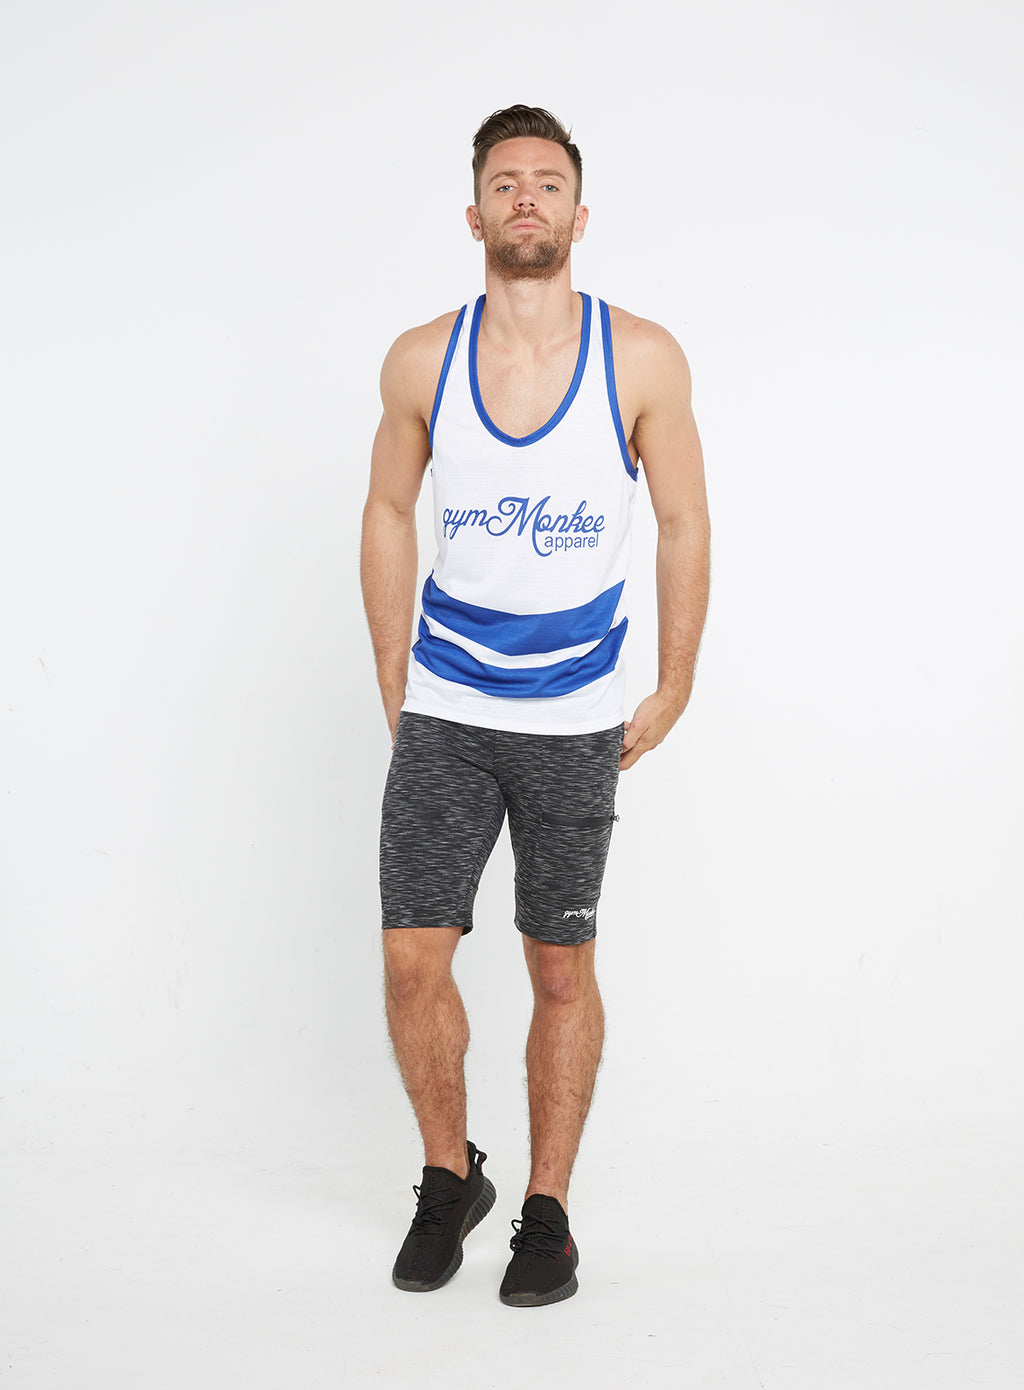 Gym Monkee - Blue and White Sublimated Vest MOVING